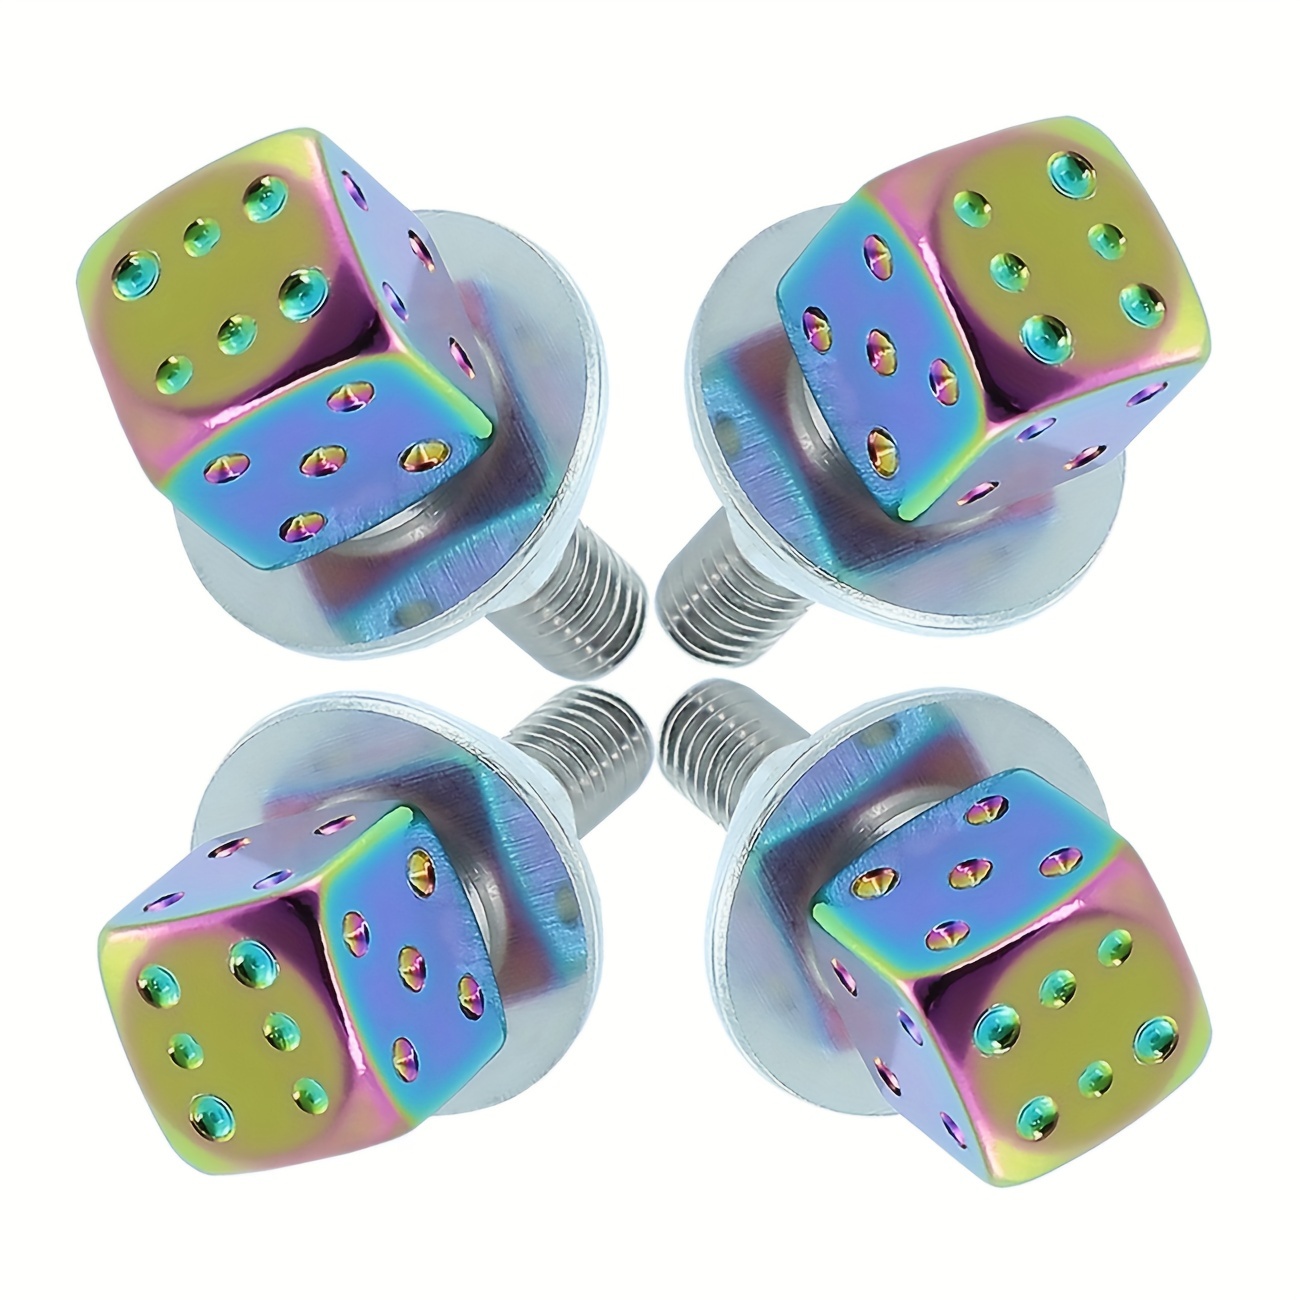 

4pcs Multi-color License Plate Fastener Dice Decorated Screws With Bolt Aluminum Alloy License Plate Decor Universal Fitment